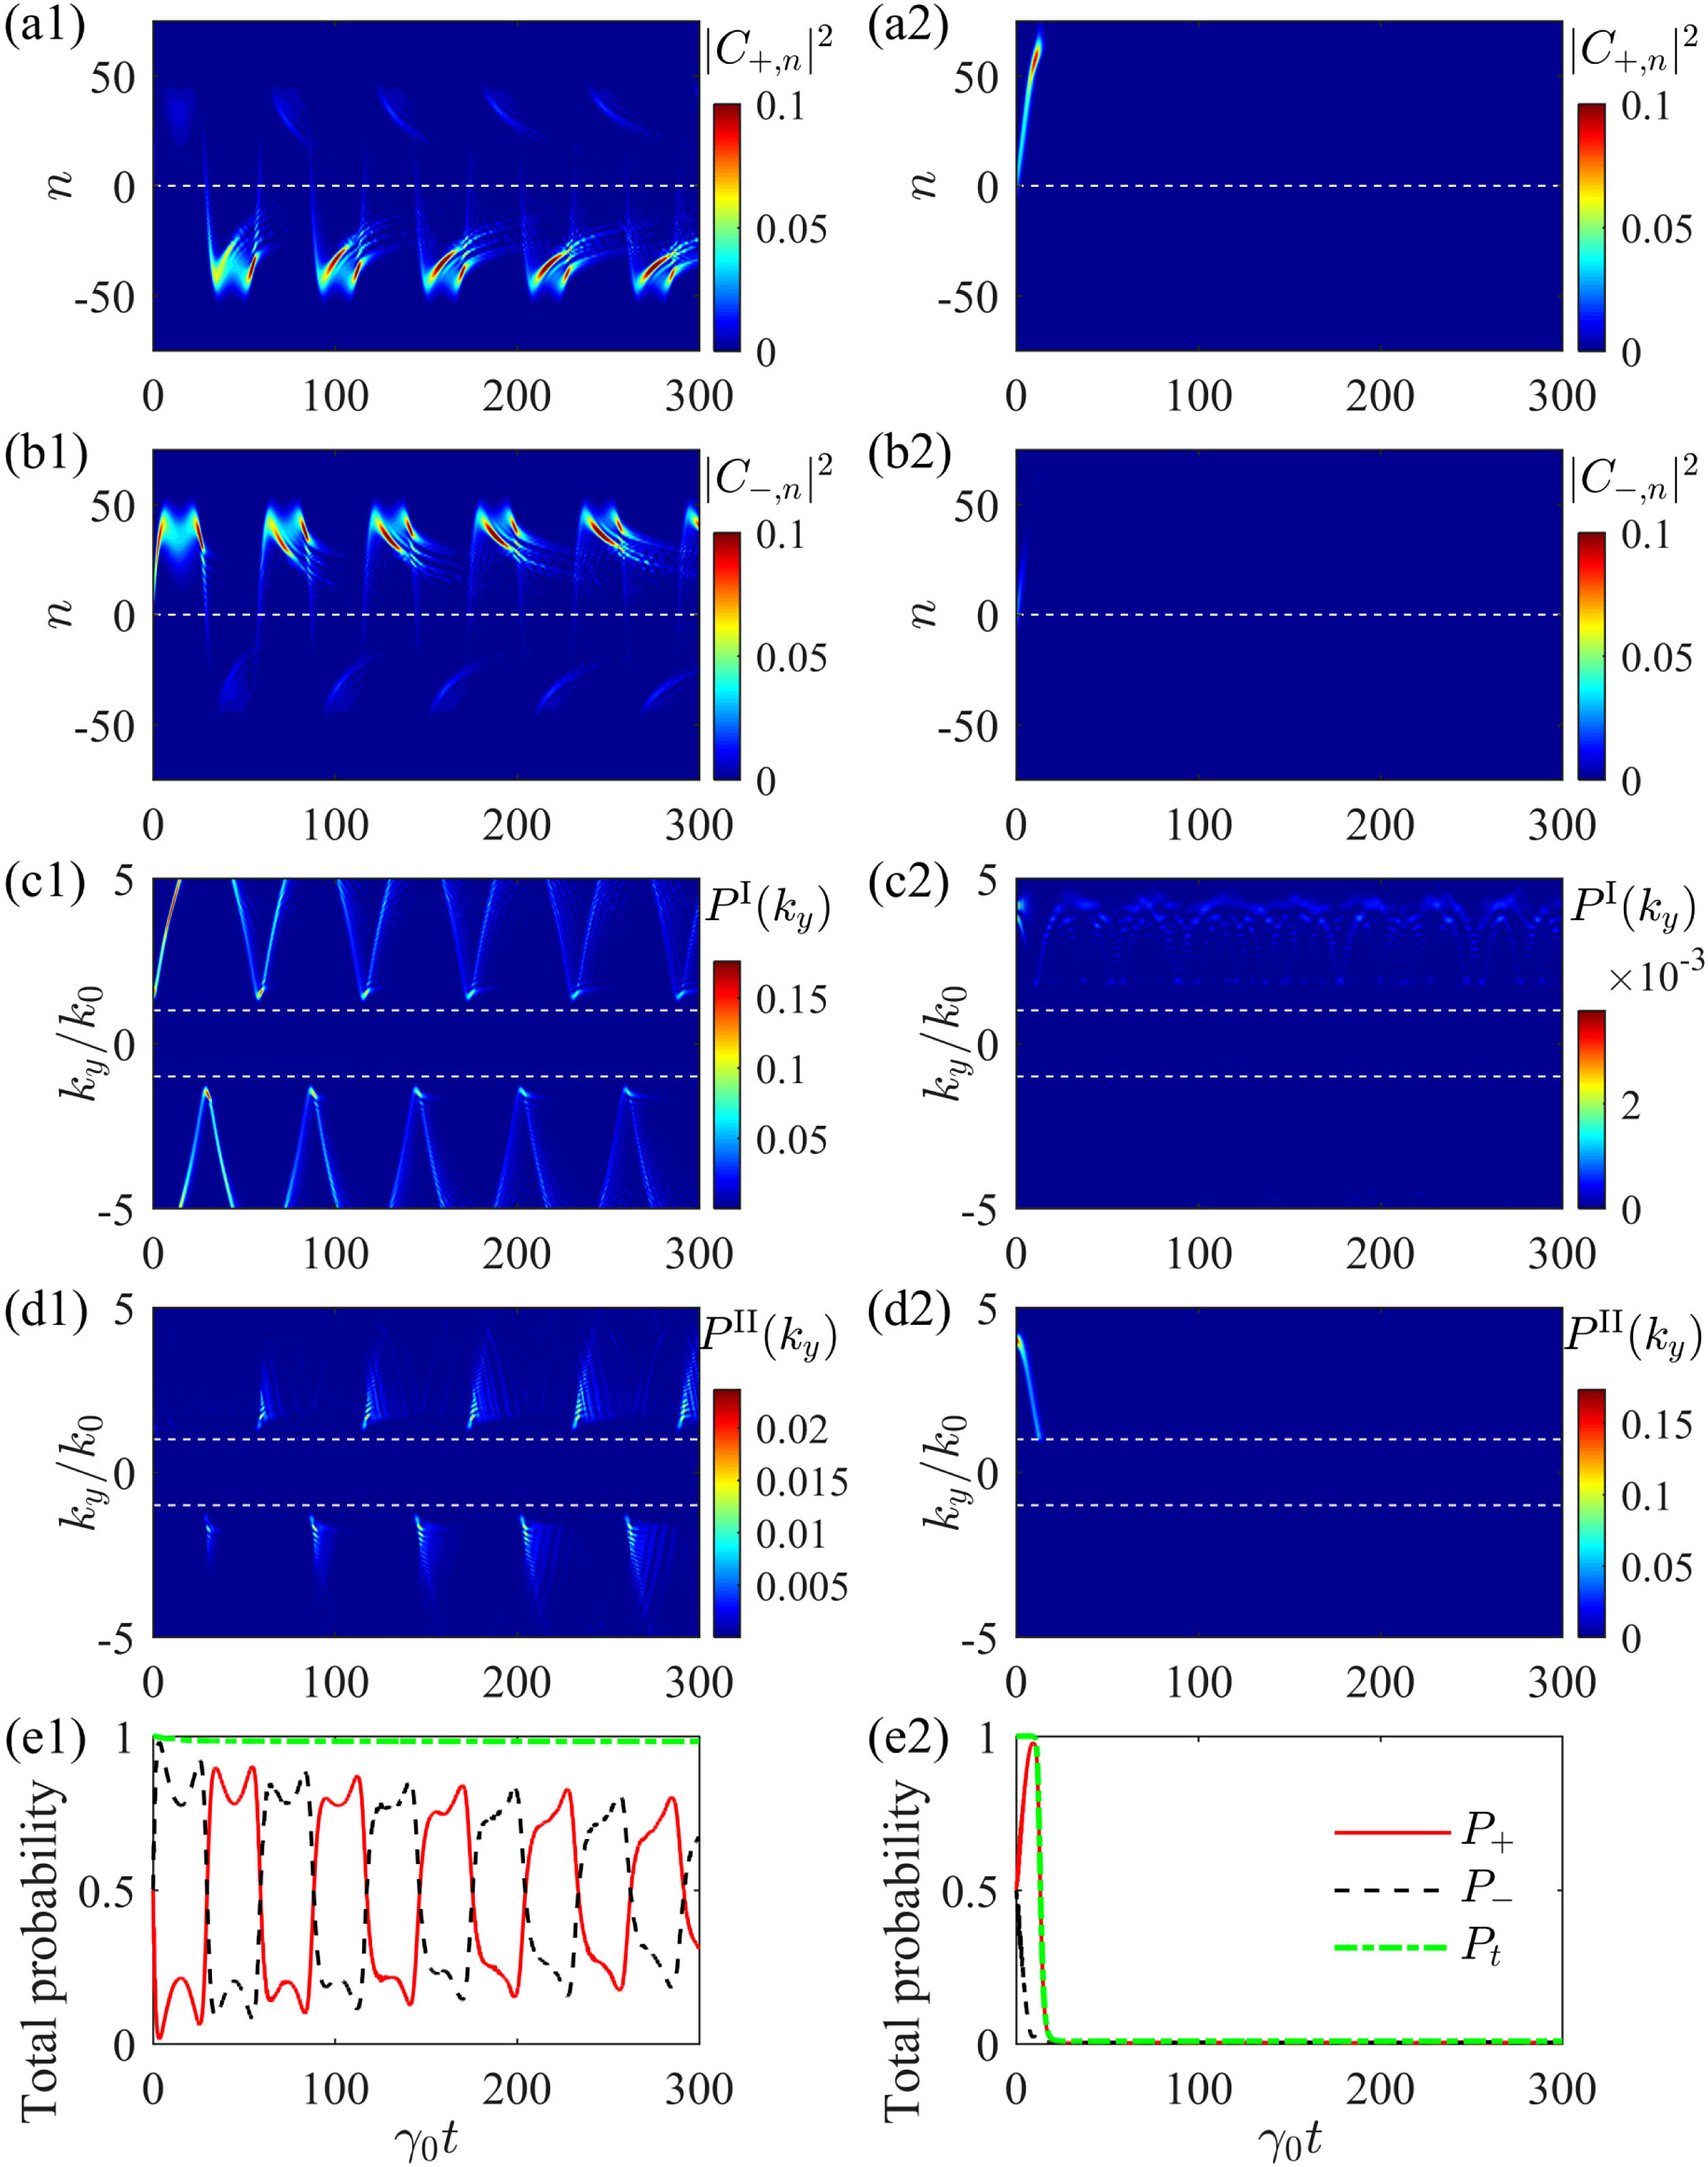 Bloch oscillations for Gaussian excitations initially centered at nc=0 with kc=1.5k0 on band I (left) and kc=4k0 on band II (right), shown by temporal evolution for excitation probabilities of (a1), (a2) |C+,n|2; (b1), (b2) |C−,n|2; (c1), (c2) PI(ky); (d1), (d2) PII(ky); (e1), (e2) P+, P−, and Pt. Here, a=0.1λ and μB0/ℏ=0.2γ0.